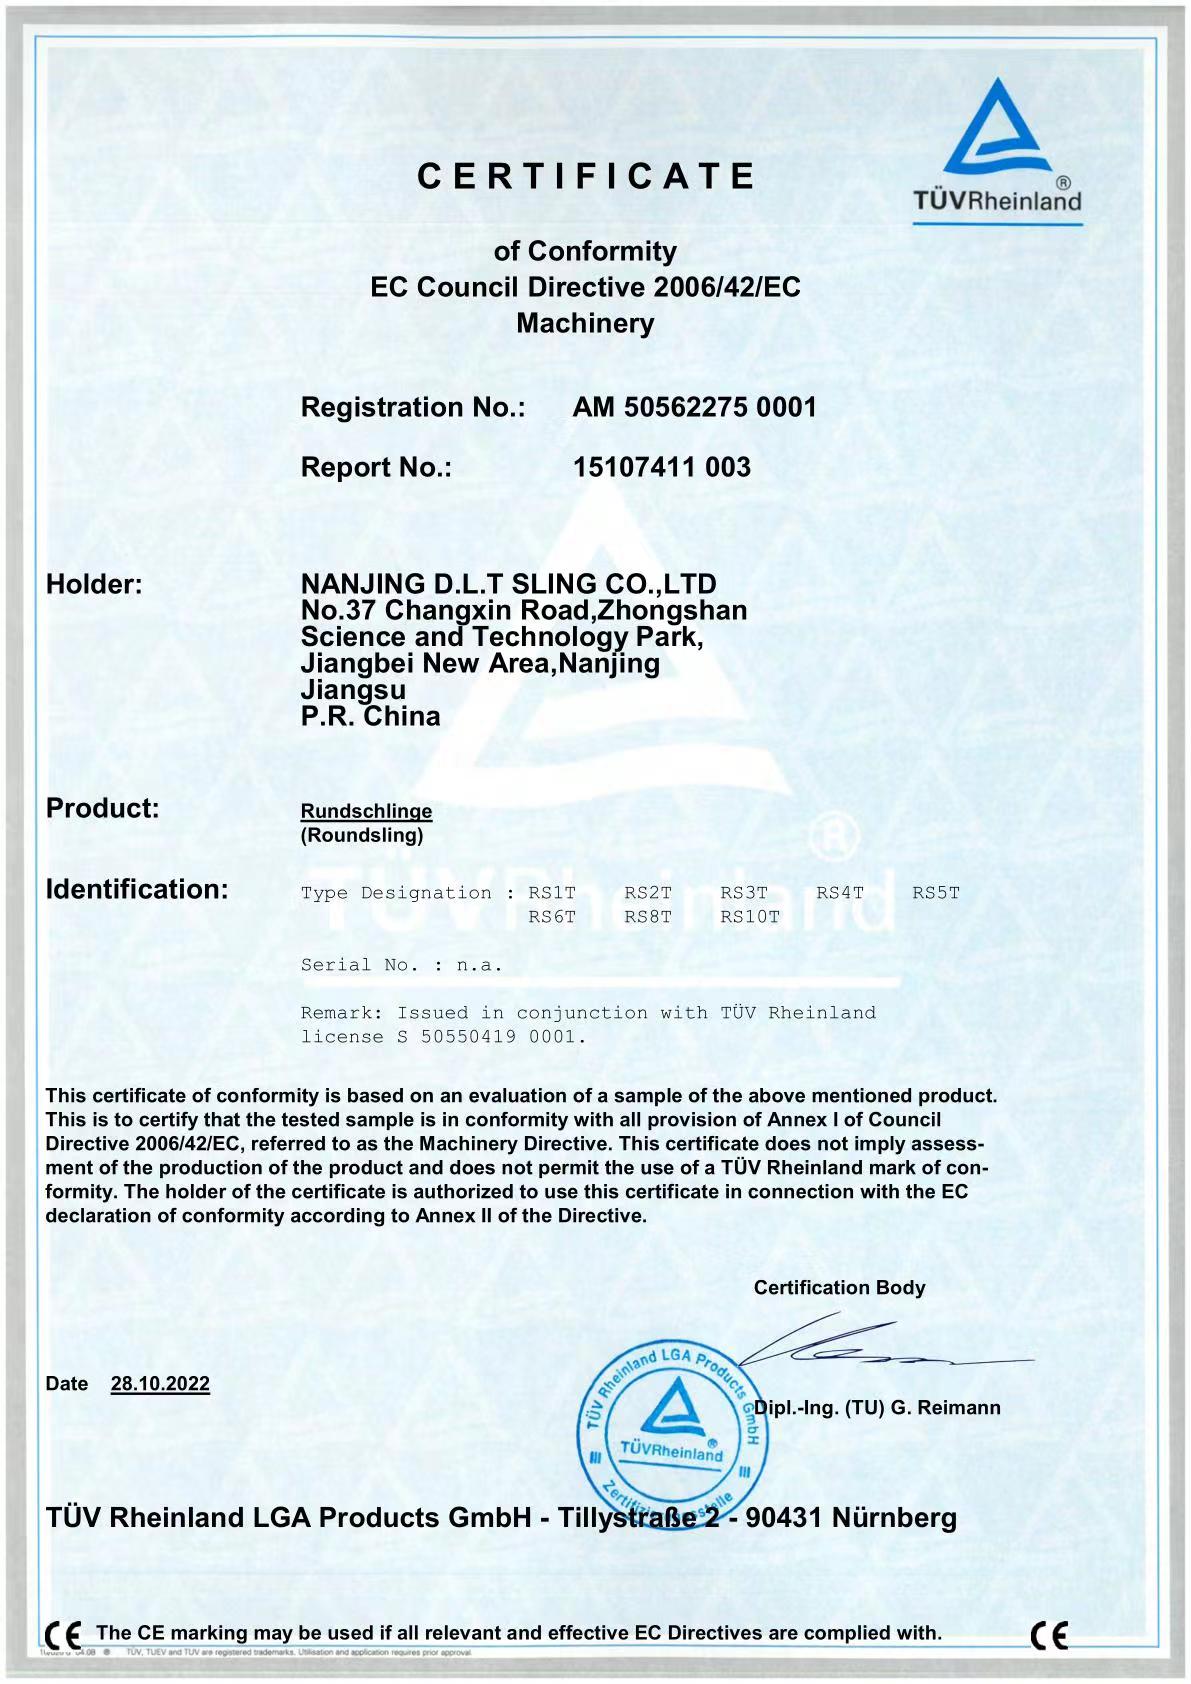 SOFT ROUND SLING CE CERTIFICATES